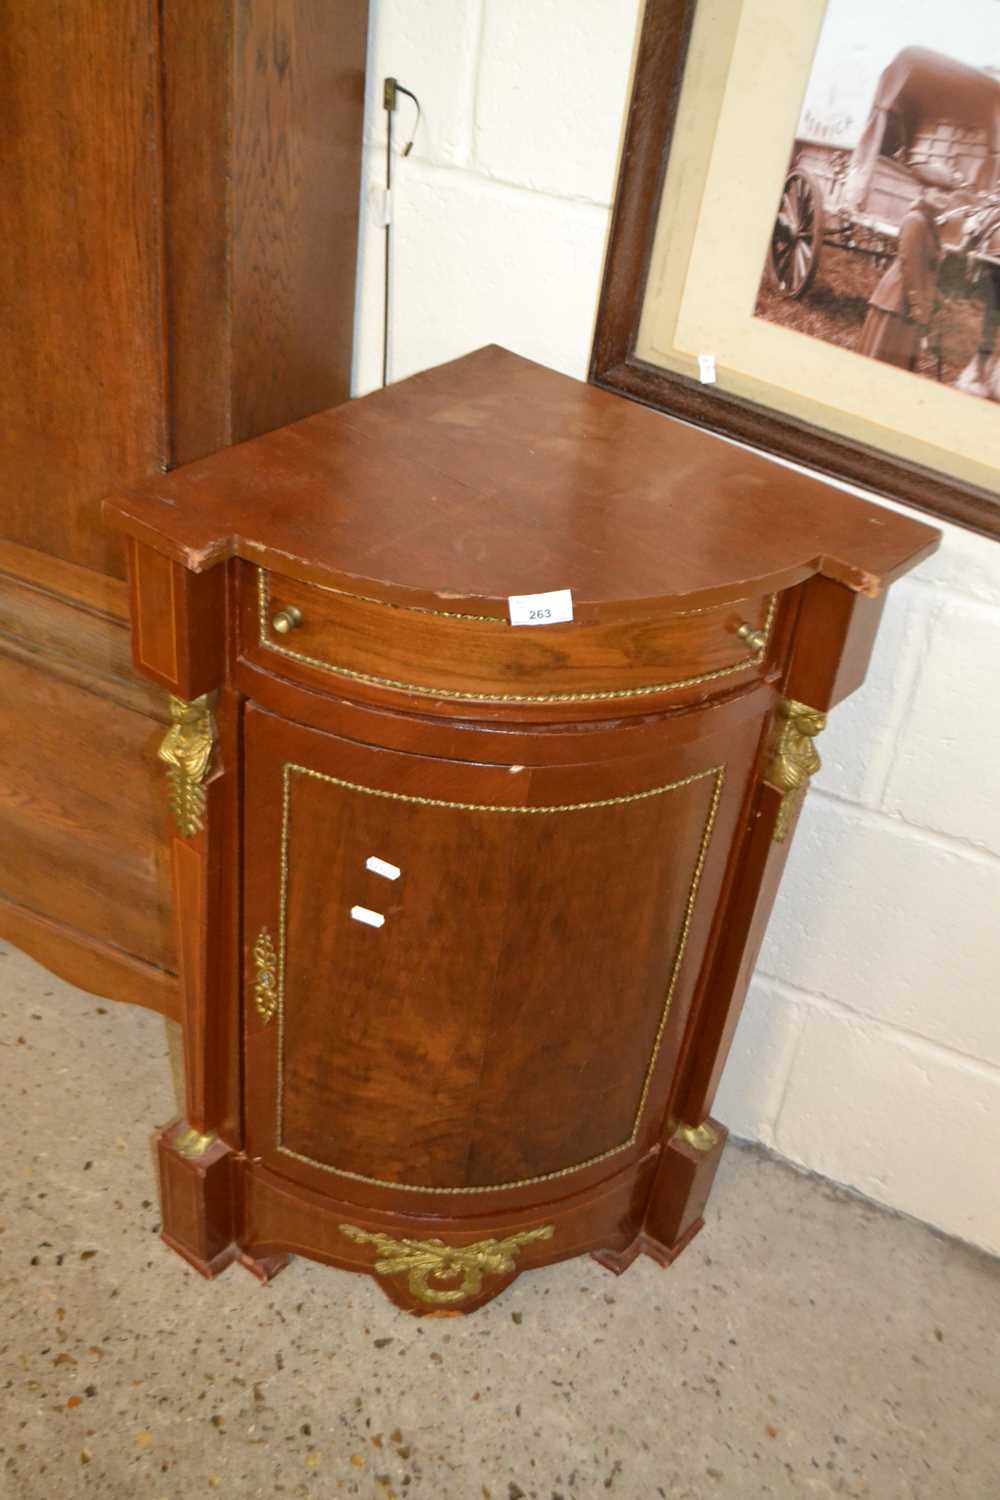 Reproduction brass mounted corner cabinet